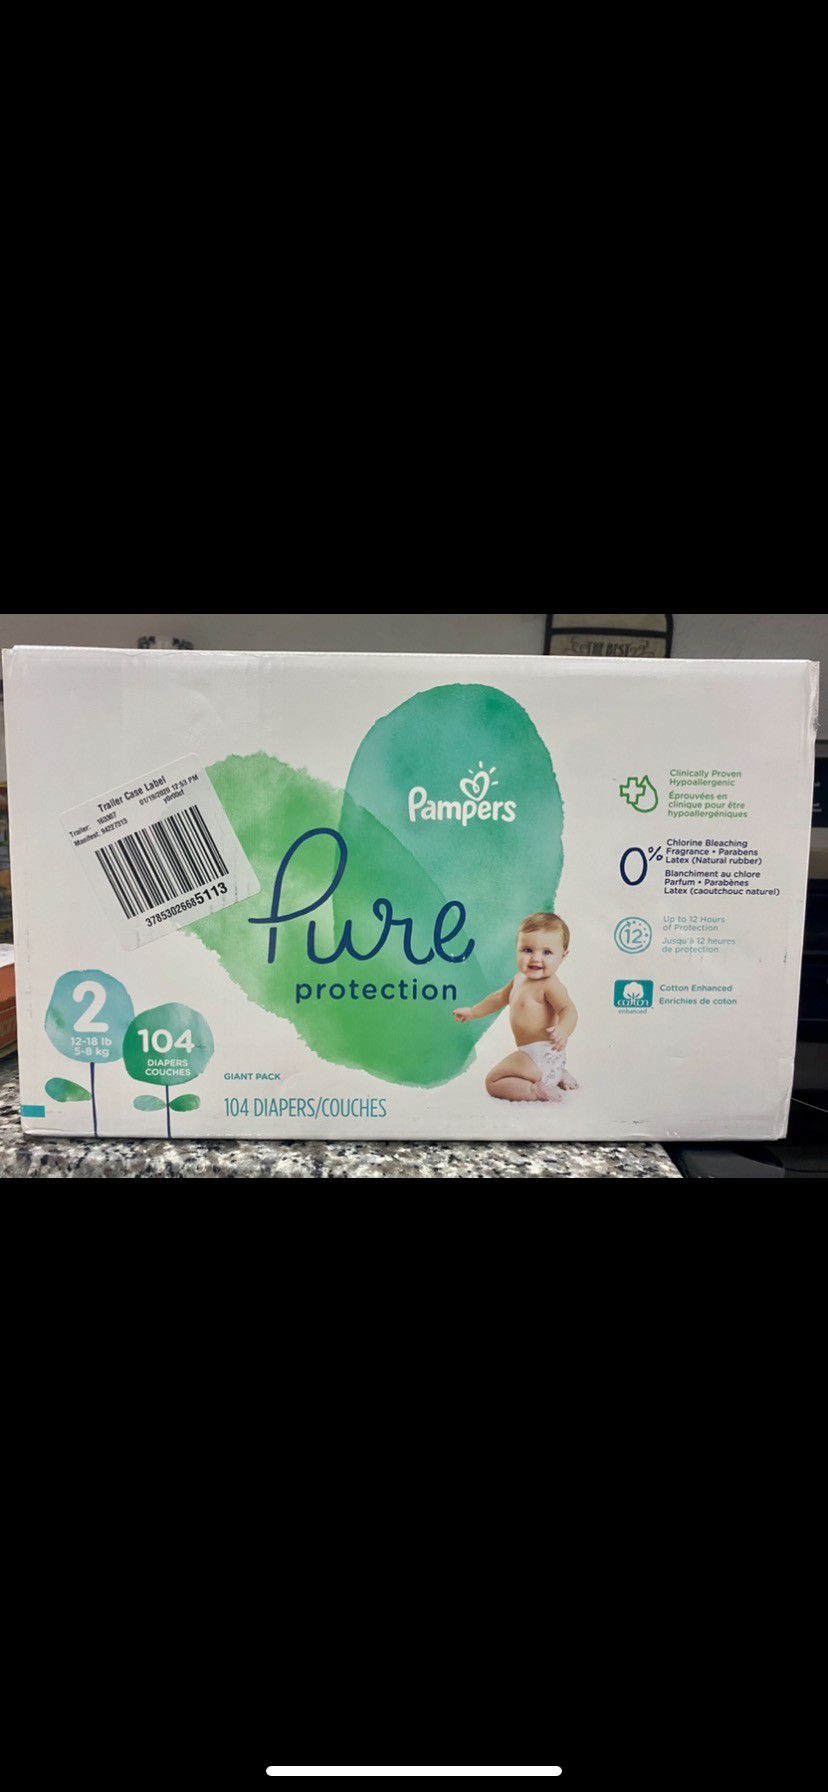 Brand New Unopened Box of Size 2 Pampers Pure Diapers